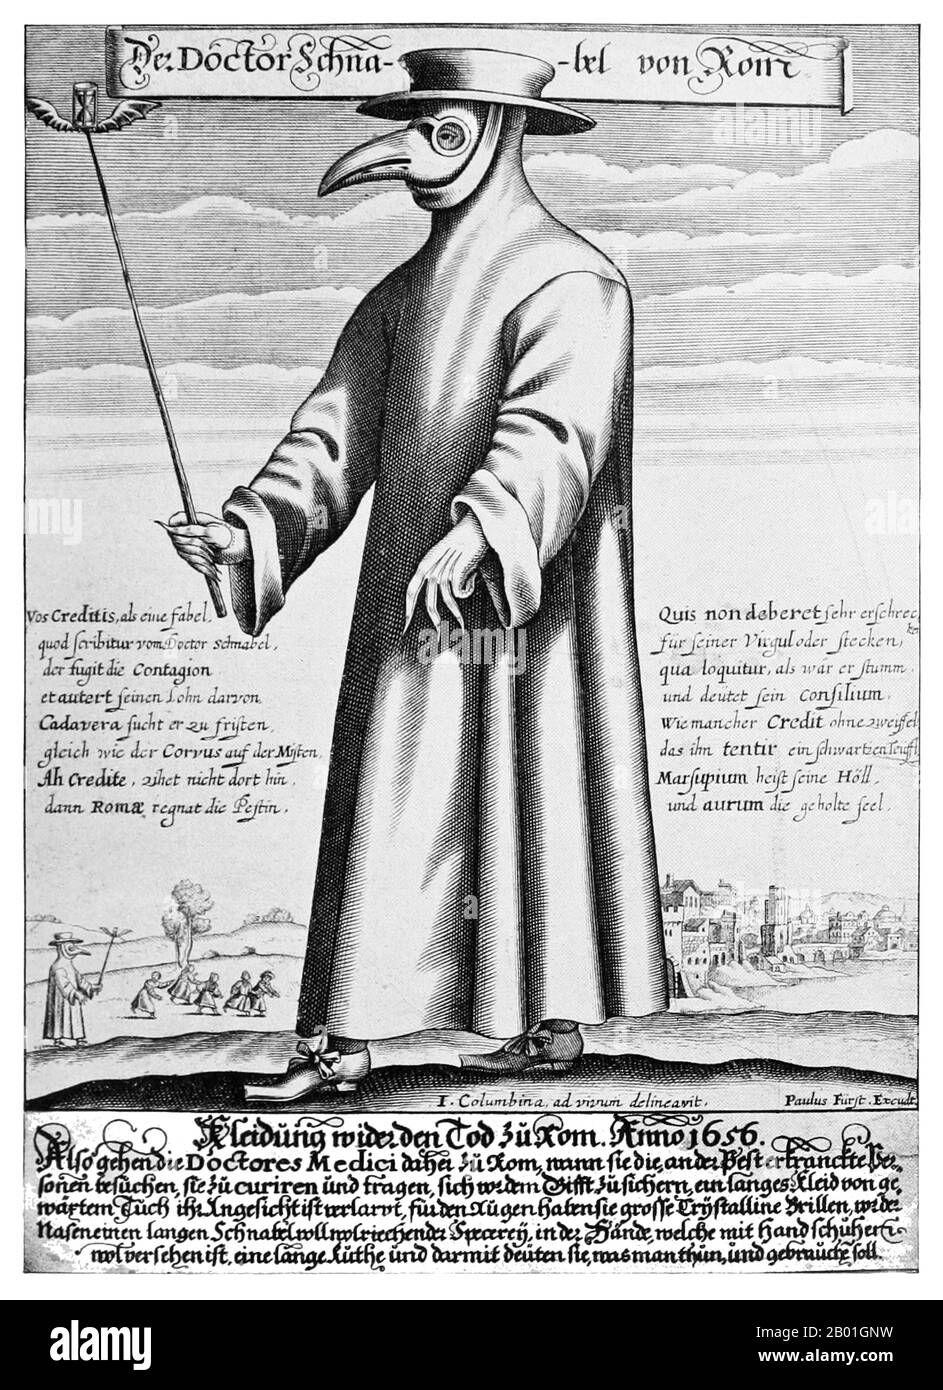 Italy: Copper engraving of Doctor Schnabel (Dr. Beak), a plague doctor in seventeenth-century Italy, with a satirical macaronic poem, c. 1656.  The Black Death was one of the most devastating pandemics in human history, peaking in Europe between 1348 and 1350. Of several competing theories, the dominant explanation for the Black Death is the plague theory, which attributes the outbreak to the bacterium Yersinia pestis.  Thought to have started in China, it travelled along the Silk Road and reached the Crimea by 1346. Stock Photo